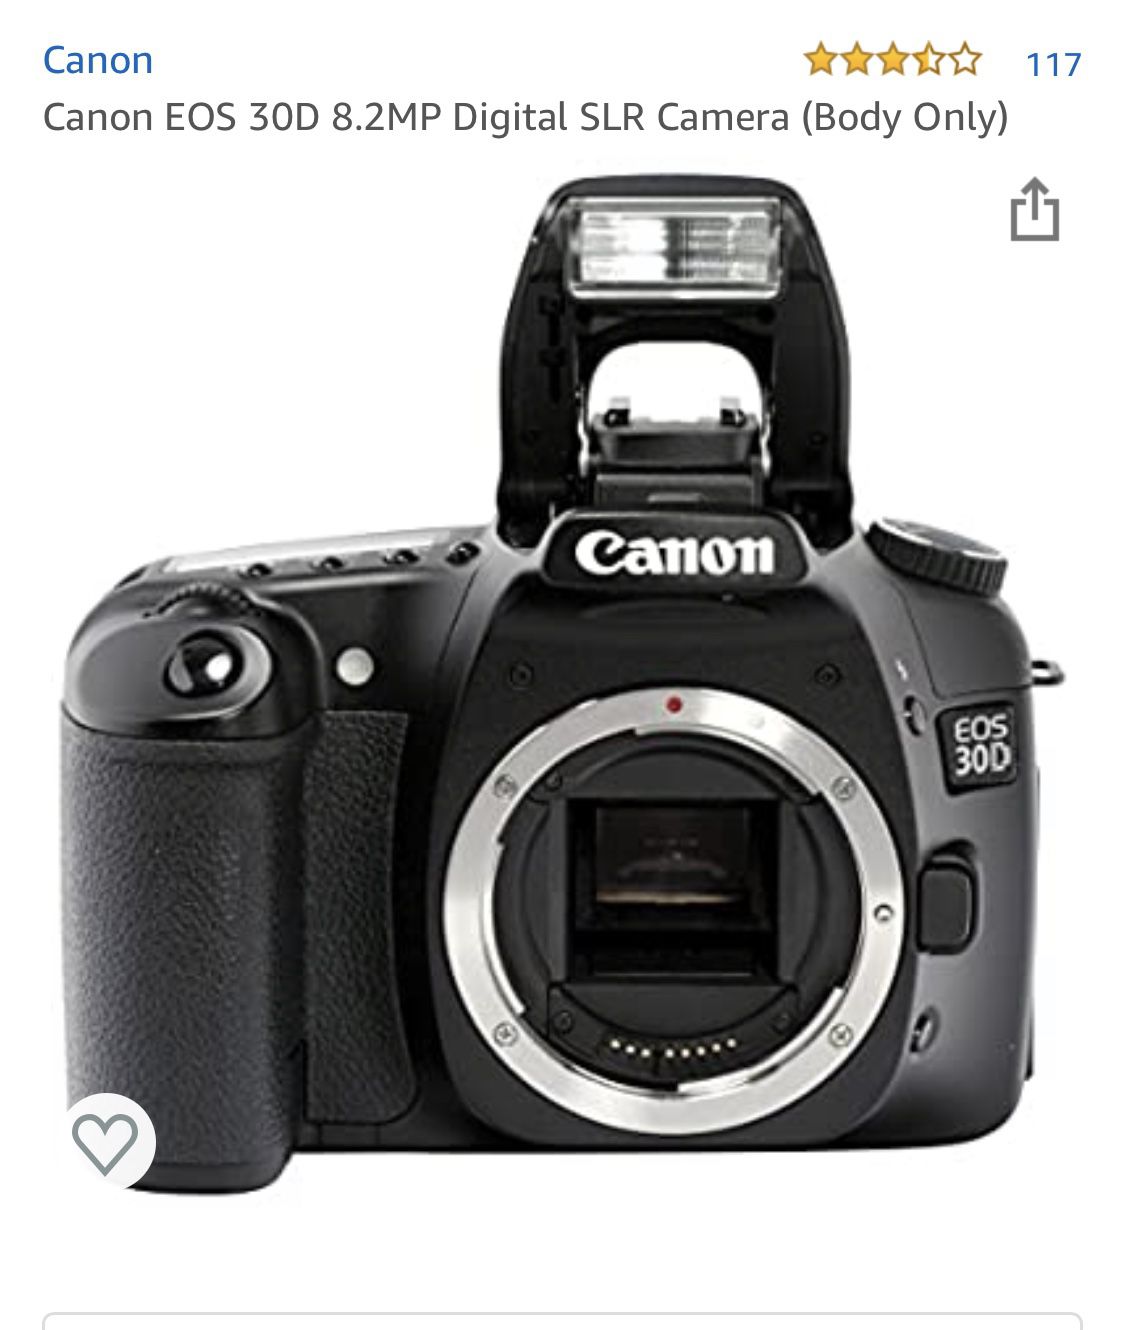 *Used CANON camera with NEW accessories